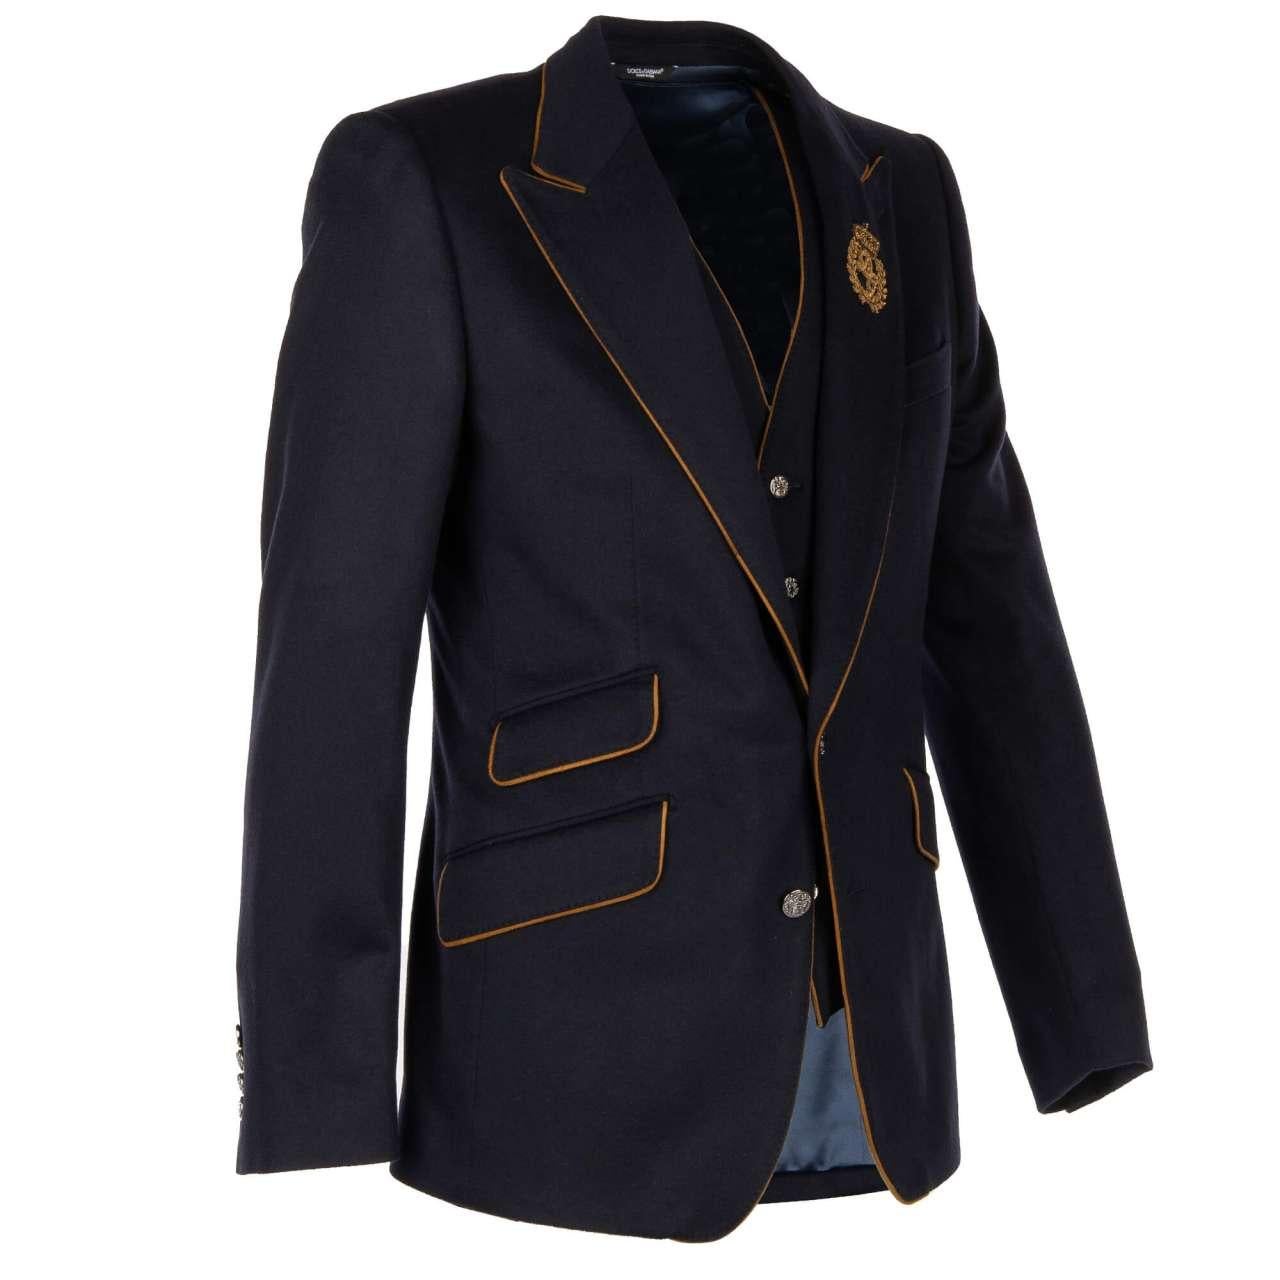 - Exclusive Cashmere Jacket / Blazer and Vest Ensemble with embroidered logo and crown, textured buttons and contrsats leather seams by DOLCE & GABBANA - SICILIA Line - Former RRP: EUR 3.950 - MADE IN ITALY - New with Tag - Slim Fit - Model: